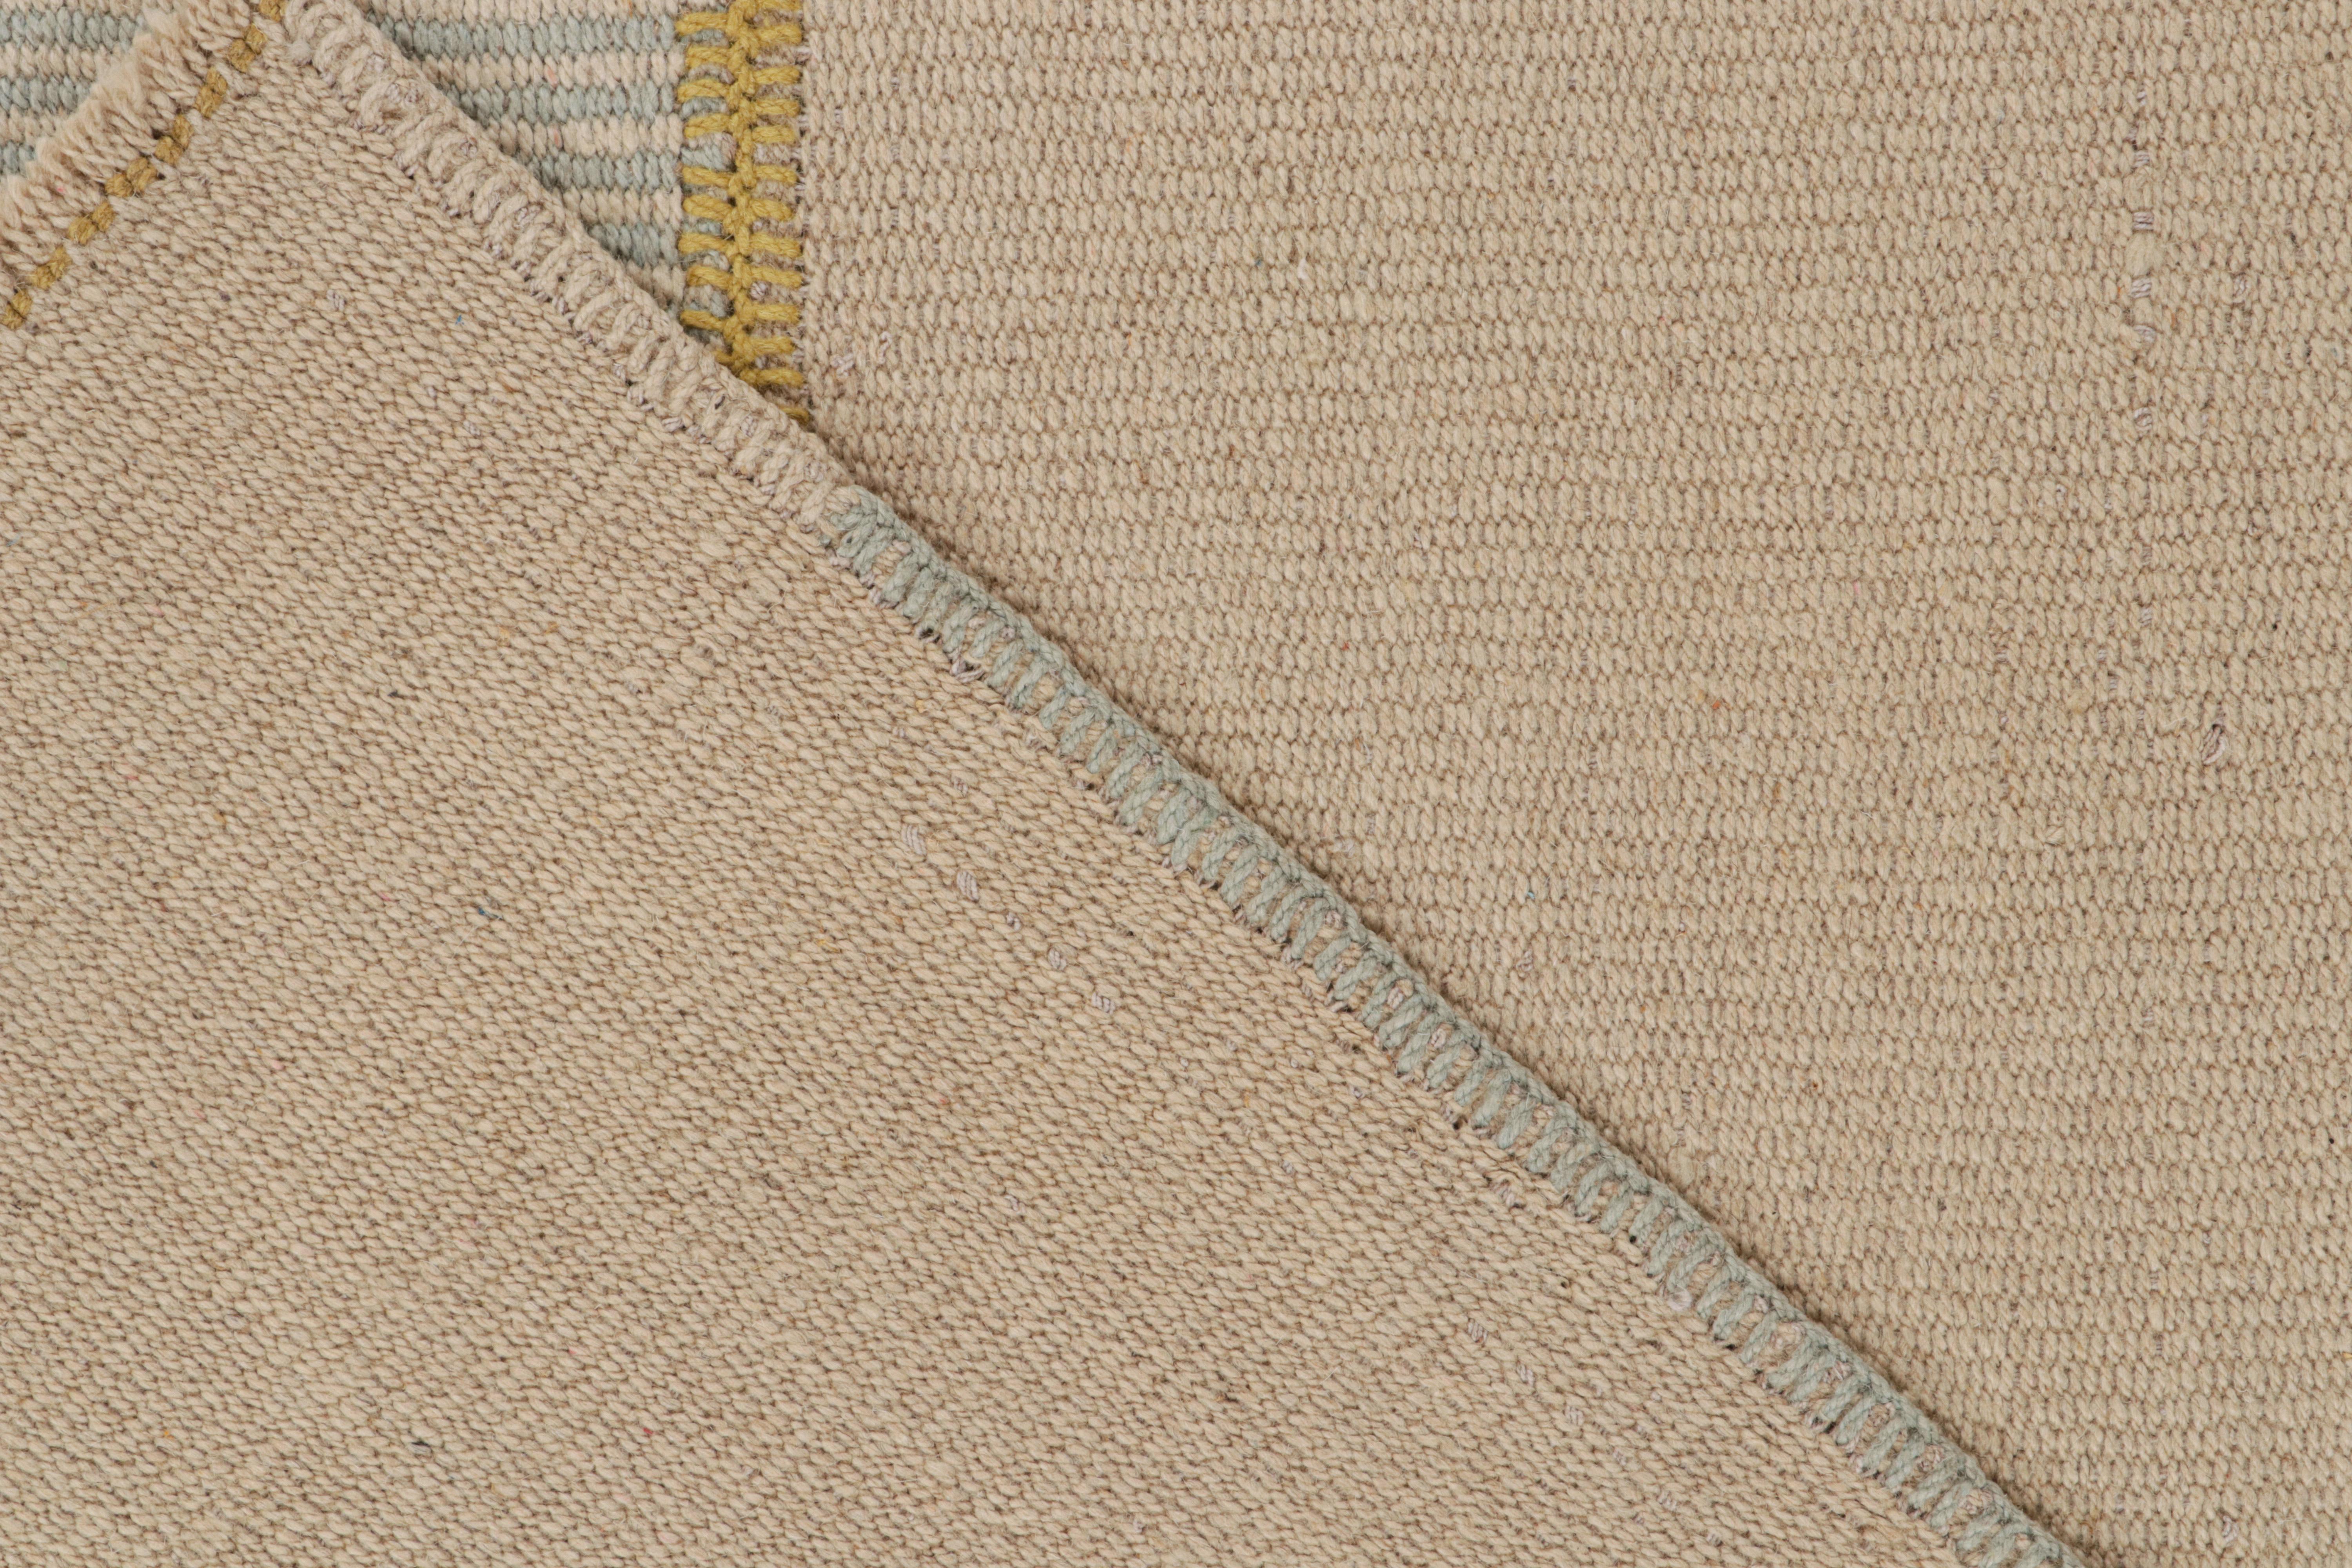 Wool Rug & Kilim’s Contemporary Kilim in Beige, Blue & Gold Stripes For Sale